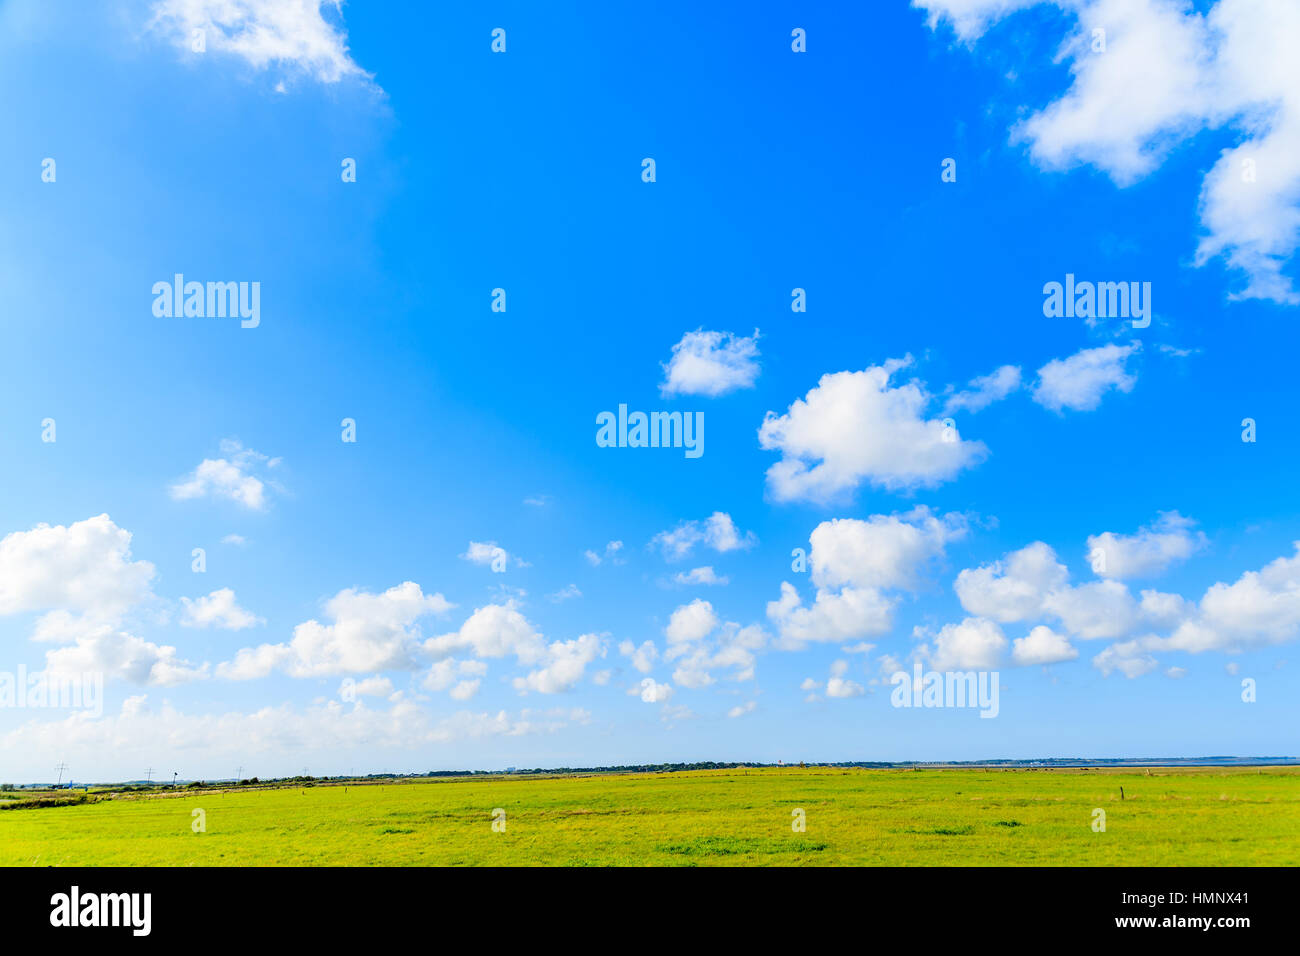 White sunny clouds on blue sky and green farming fields, Sylt island, Germany Stock Photo